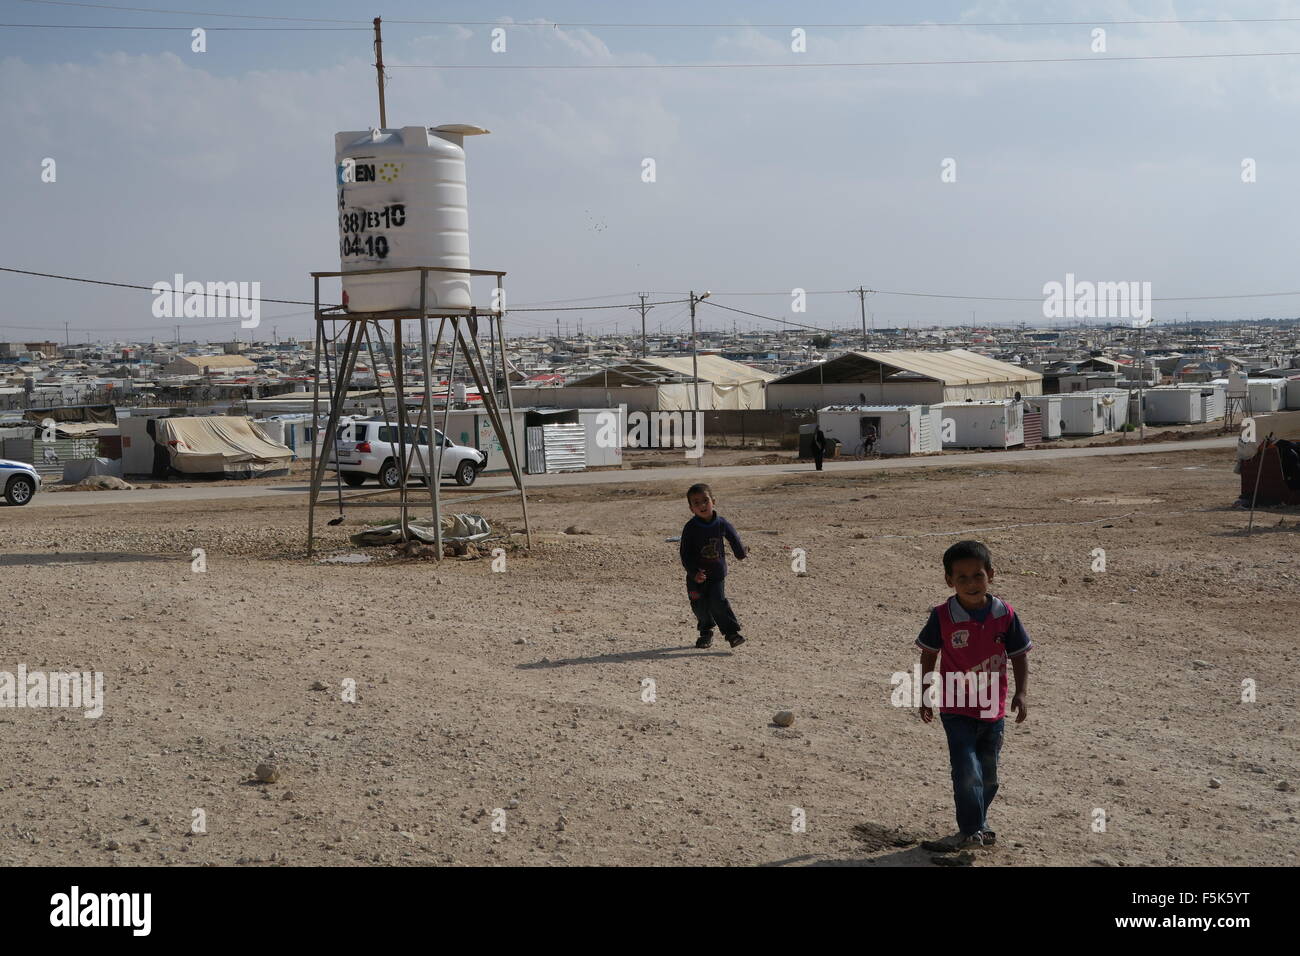 Two refugee boys play in the dust near a water tower at the highest point at Zaatari refugee camp in Jordan Stock Photo